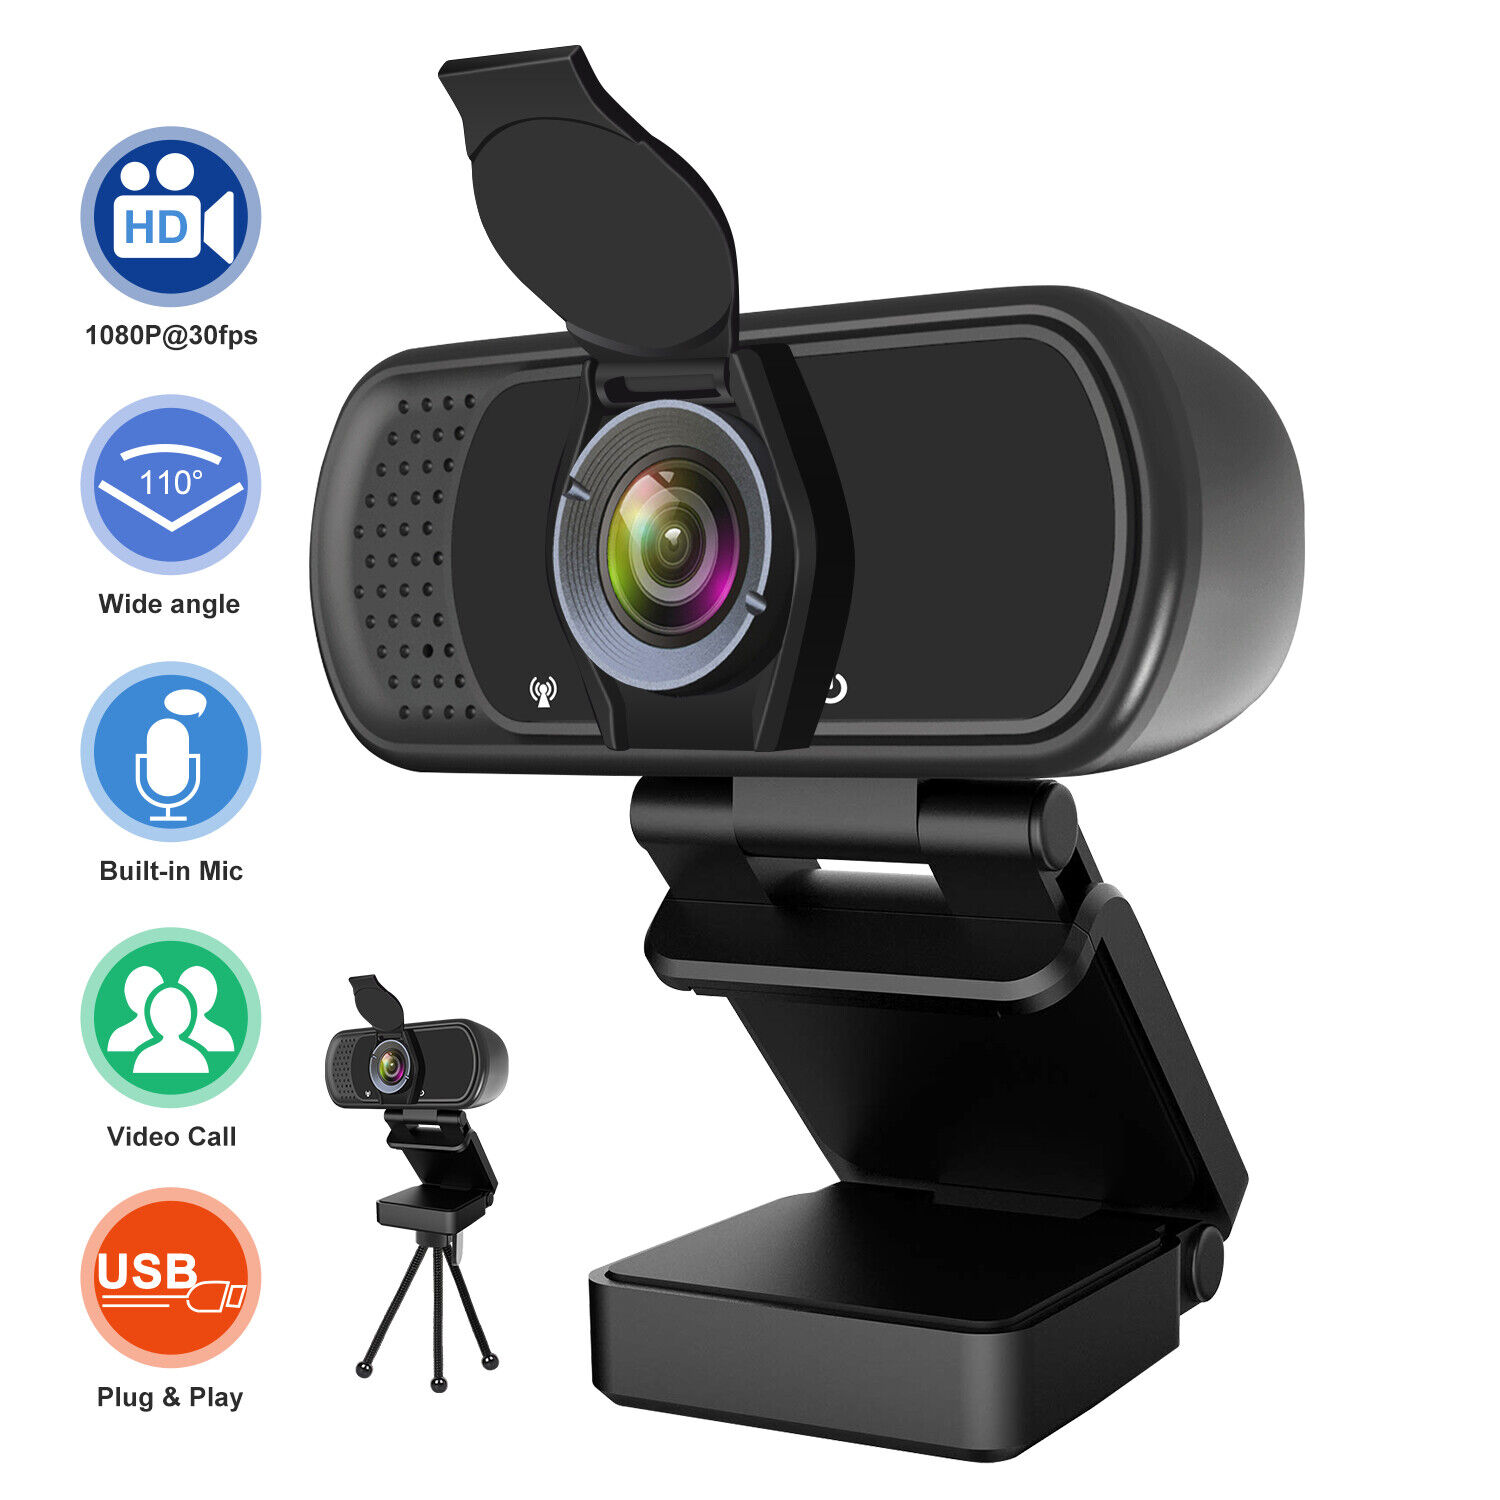 Full 1080P HD USB Webcam for PC Desktop & Laptop Web Camera with Microphone/FHD